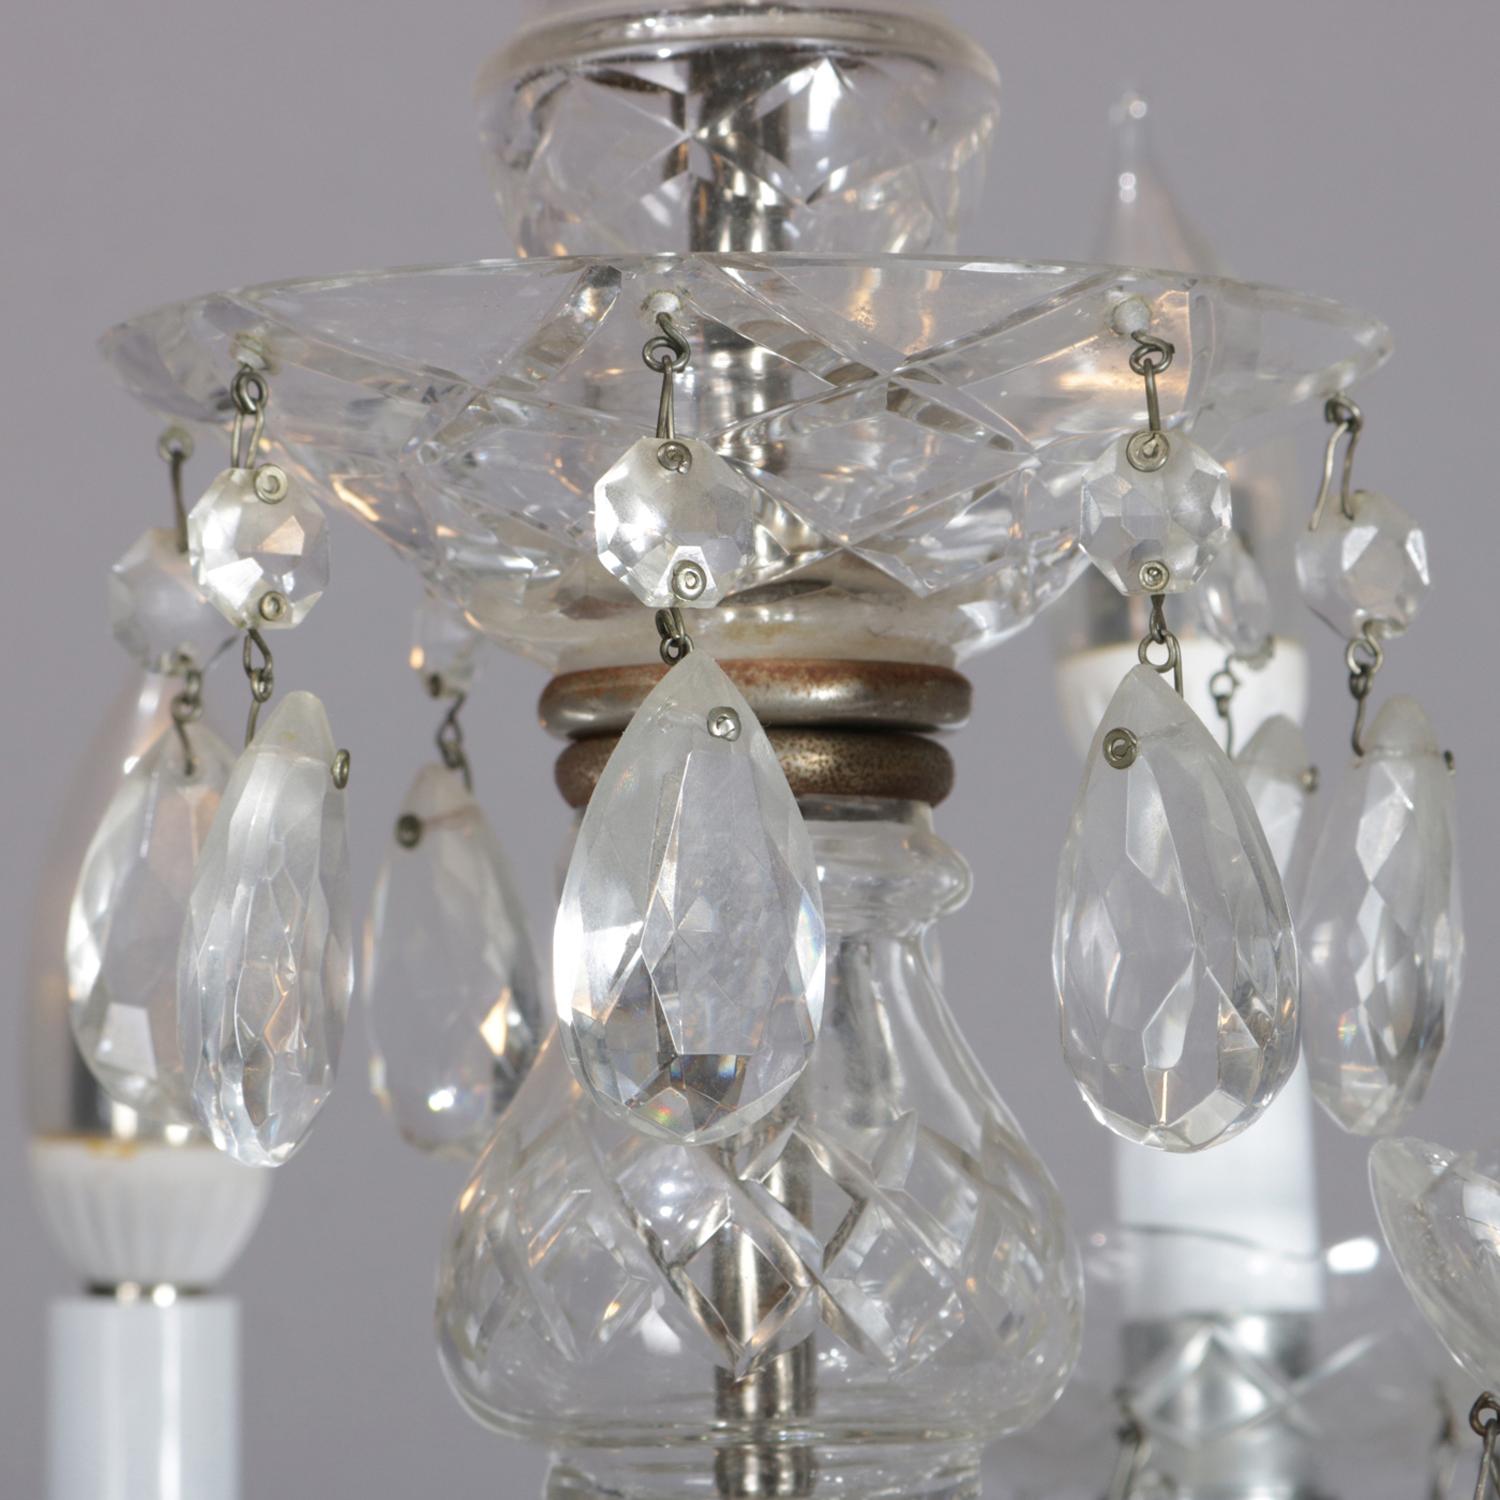 20th Century Italian Cut Crystal and Chrome Petite Chandelier for Hall, Bath or Dinette